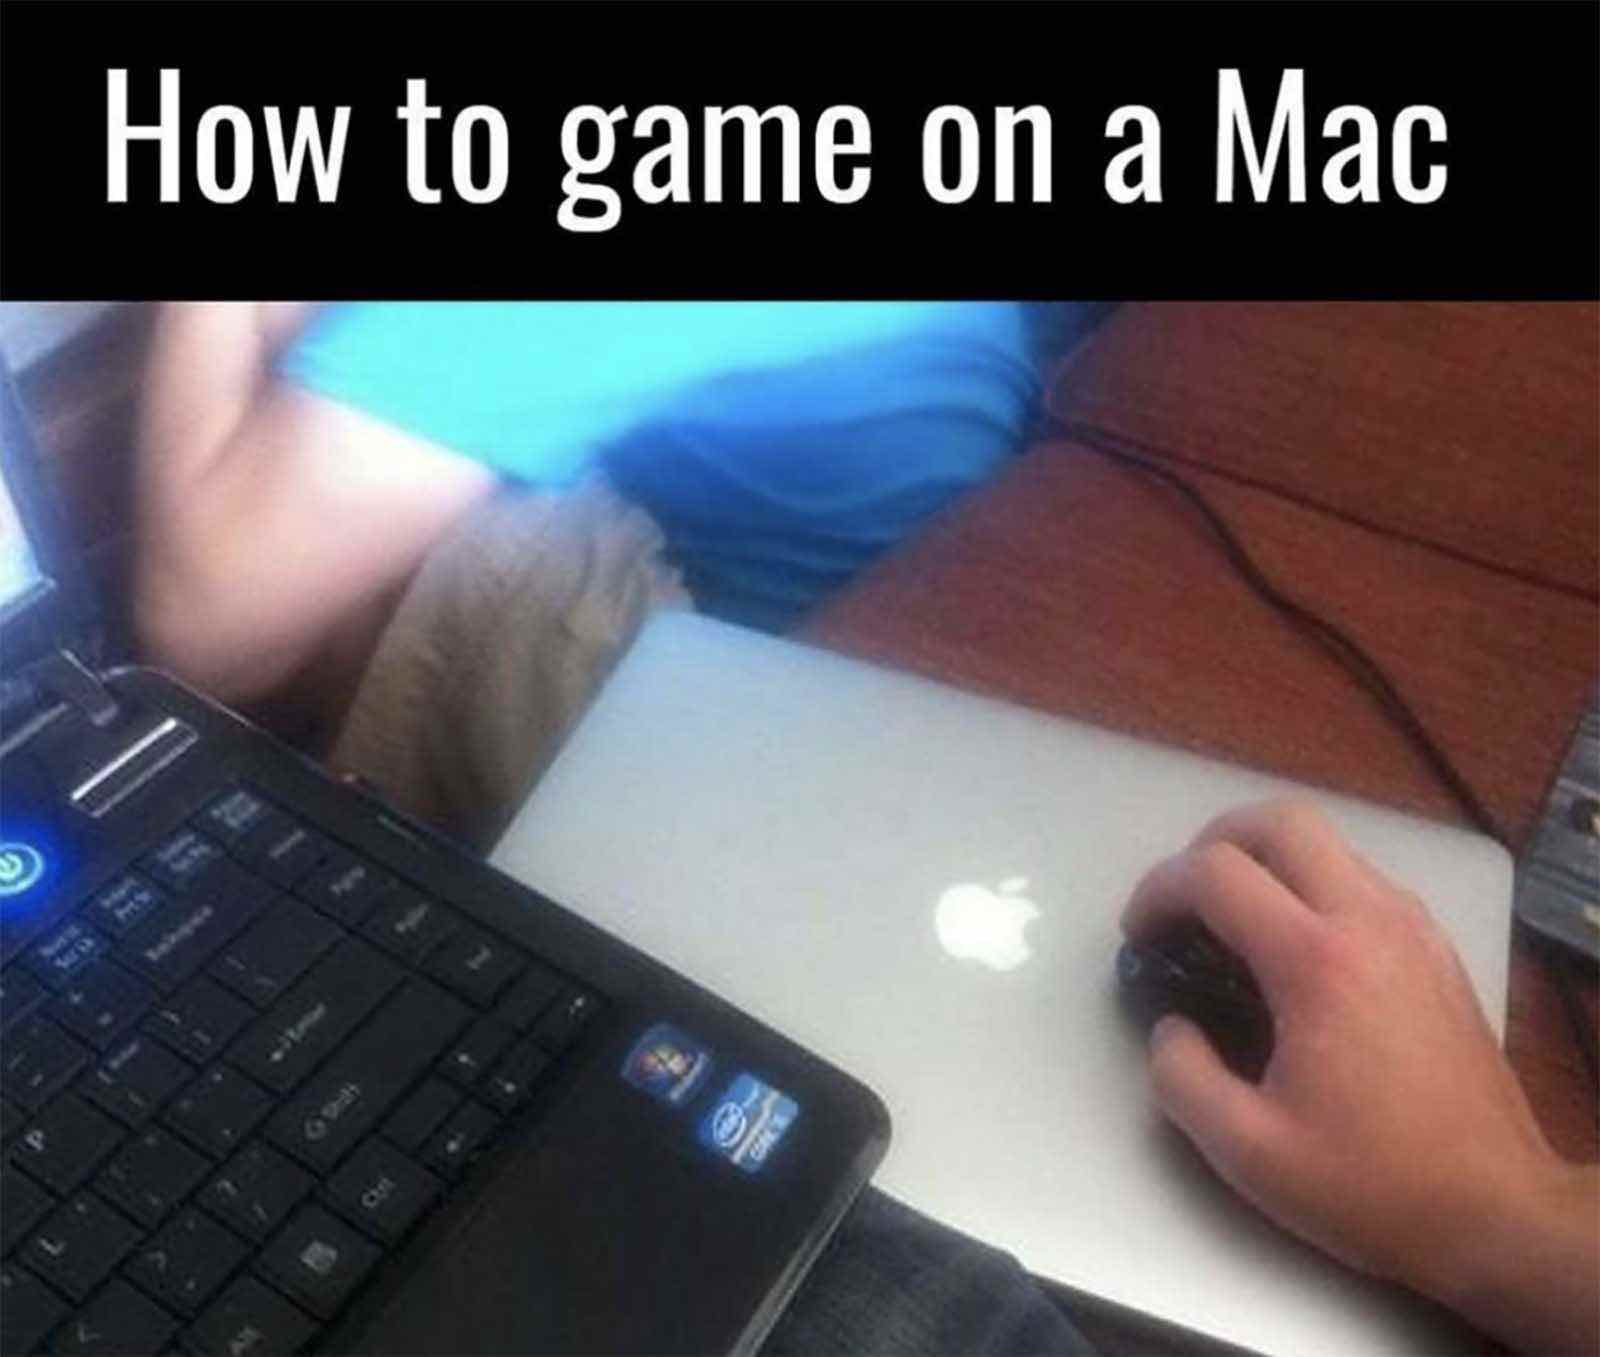 gaming memes - How to game on a Mac